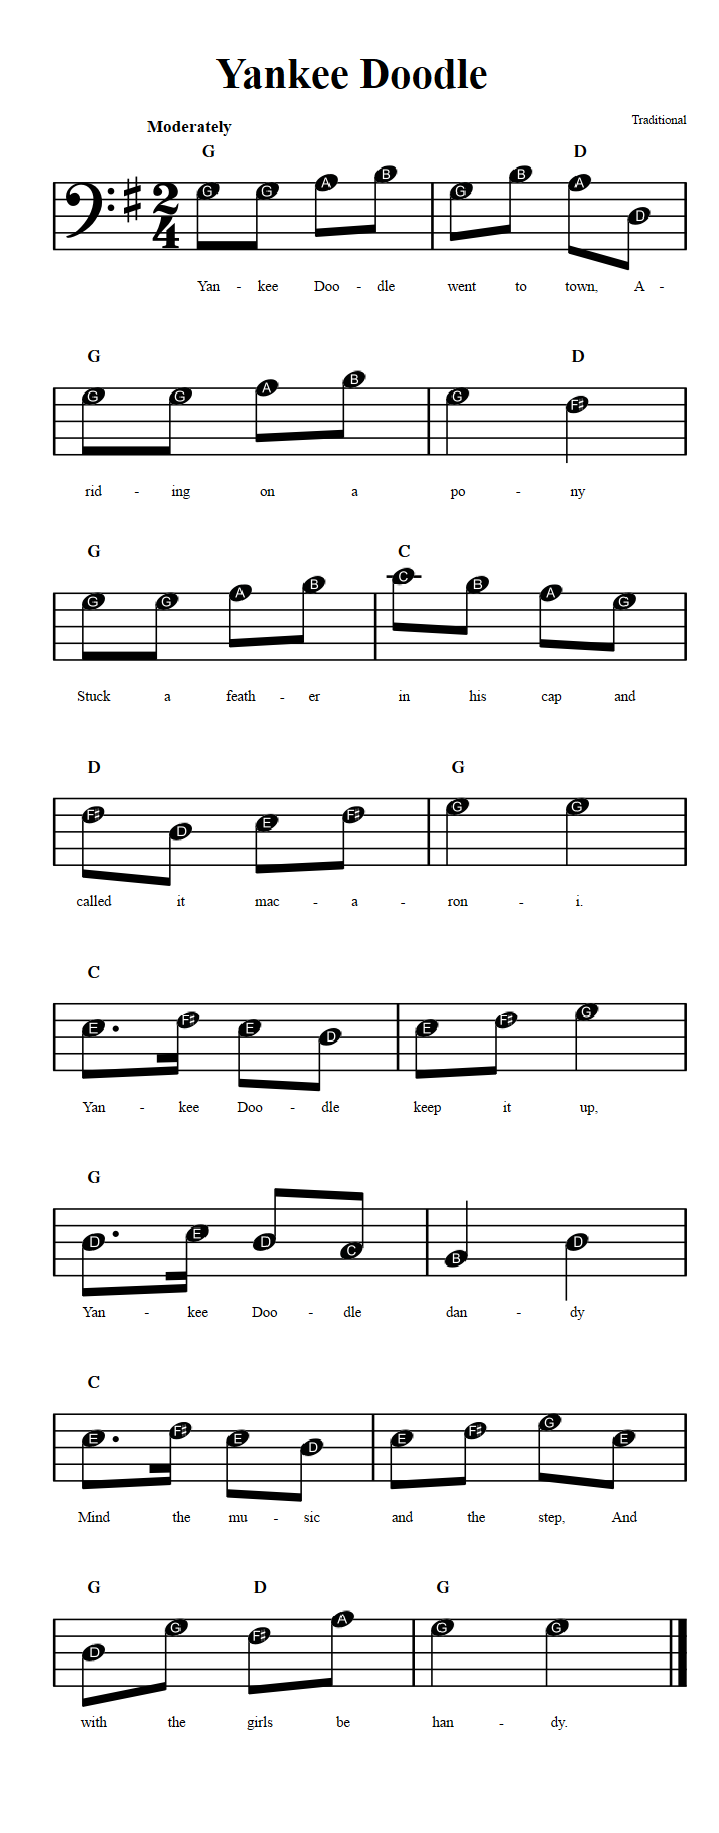 Yankee Doodle: Beginner Bass Clef Sheet Music with Chords and Lyrics